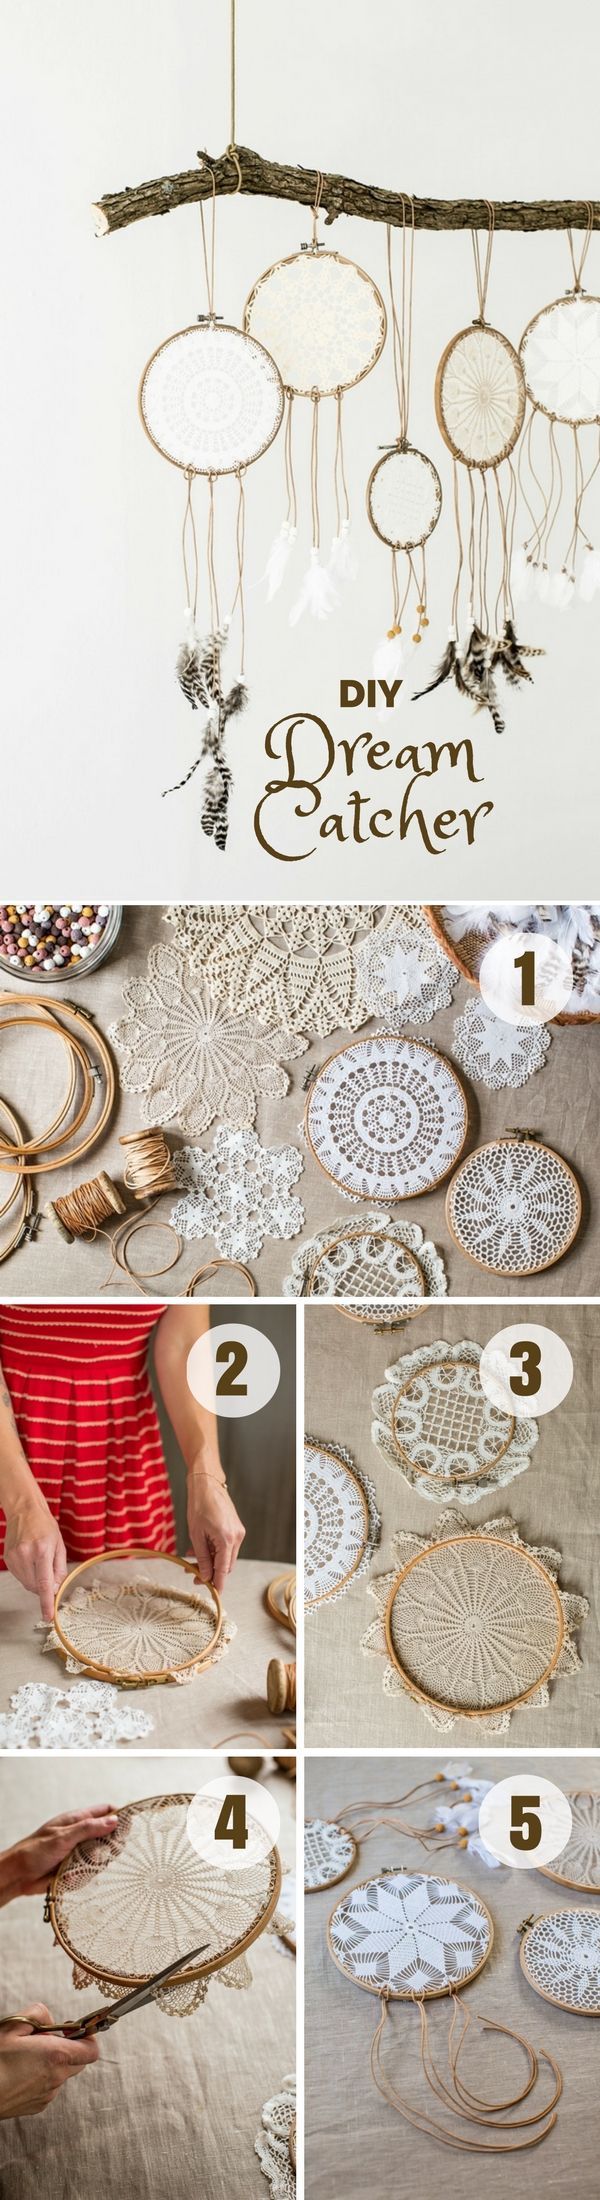 Check out how to easily make this DIY Dream Catcher /istandarddesign/